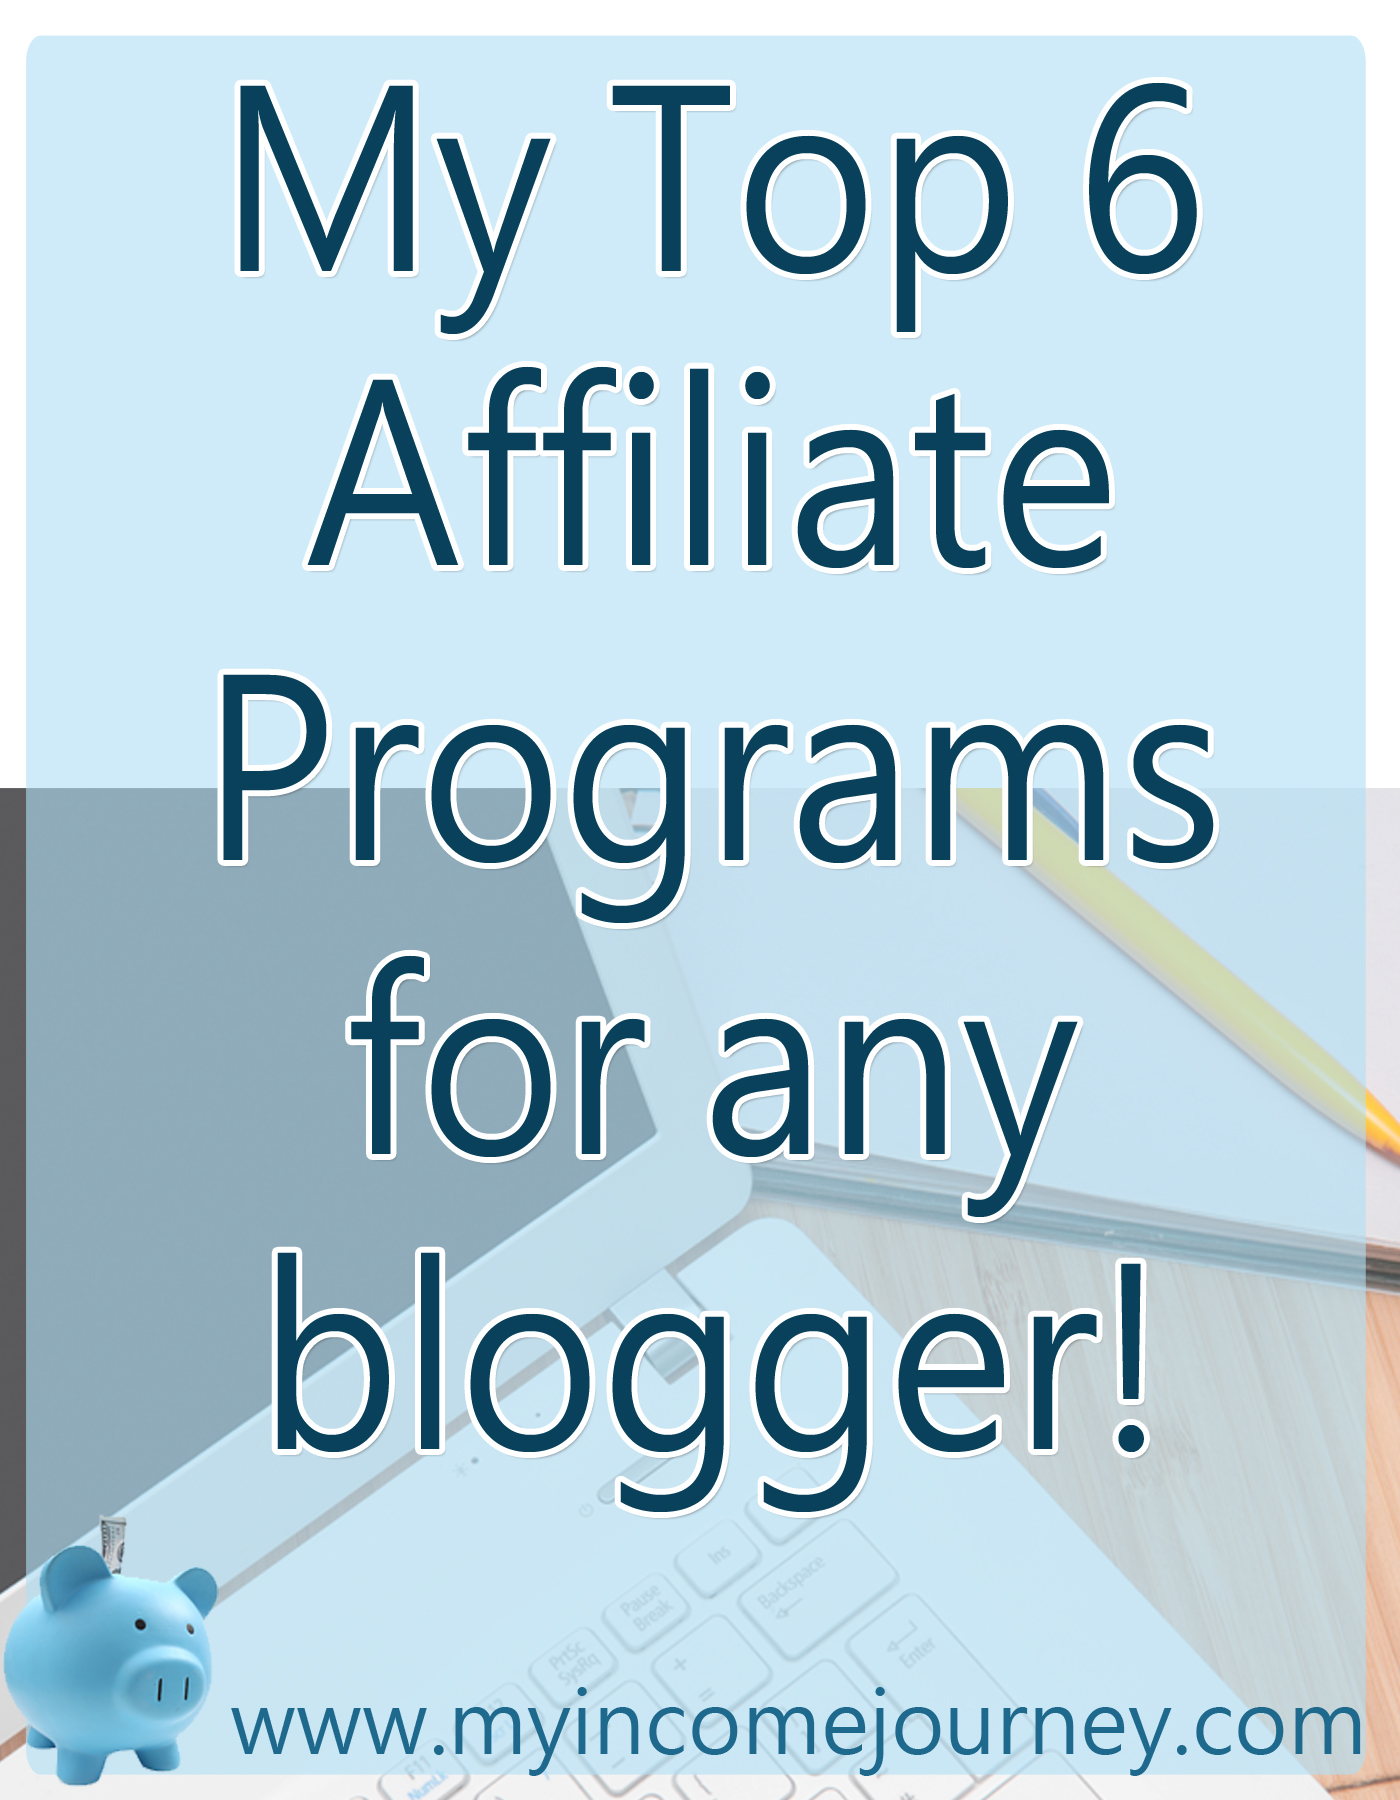 Top 6 affiliate programs for any blogger